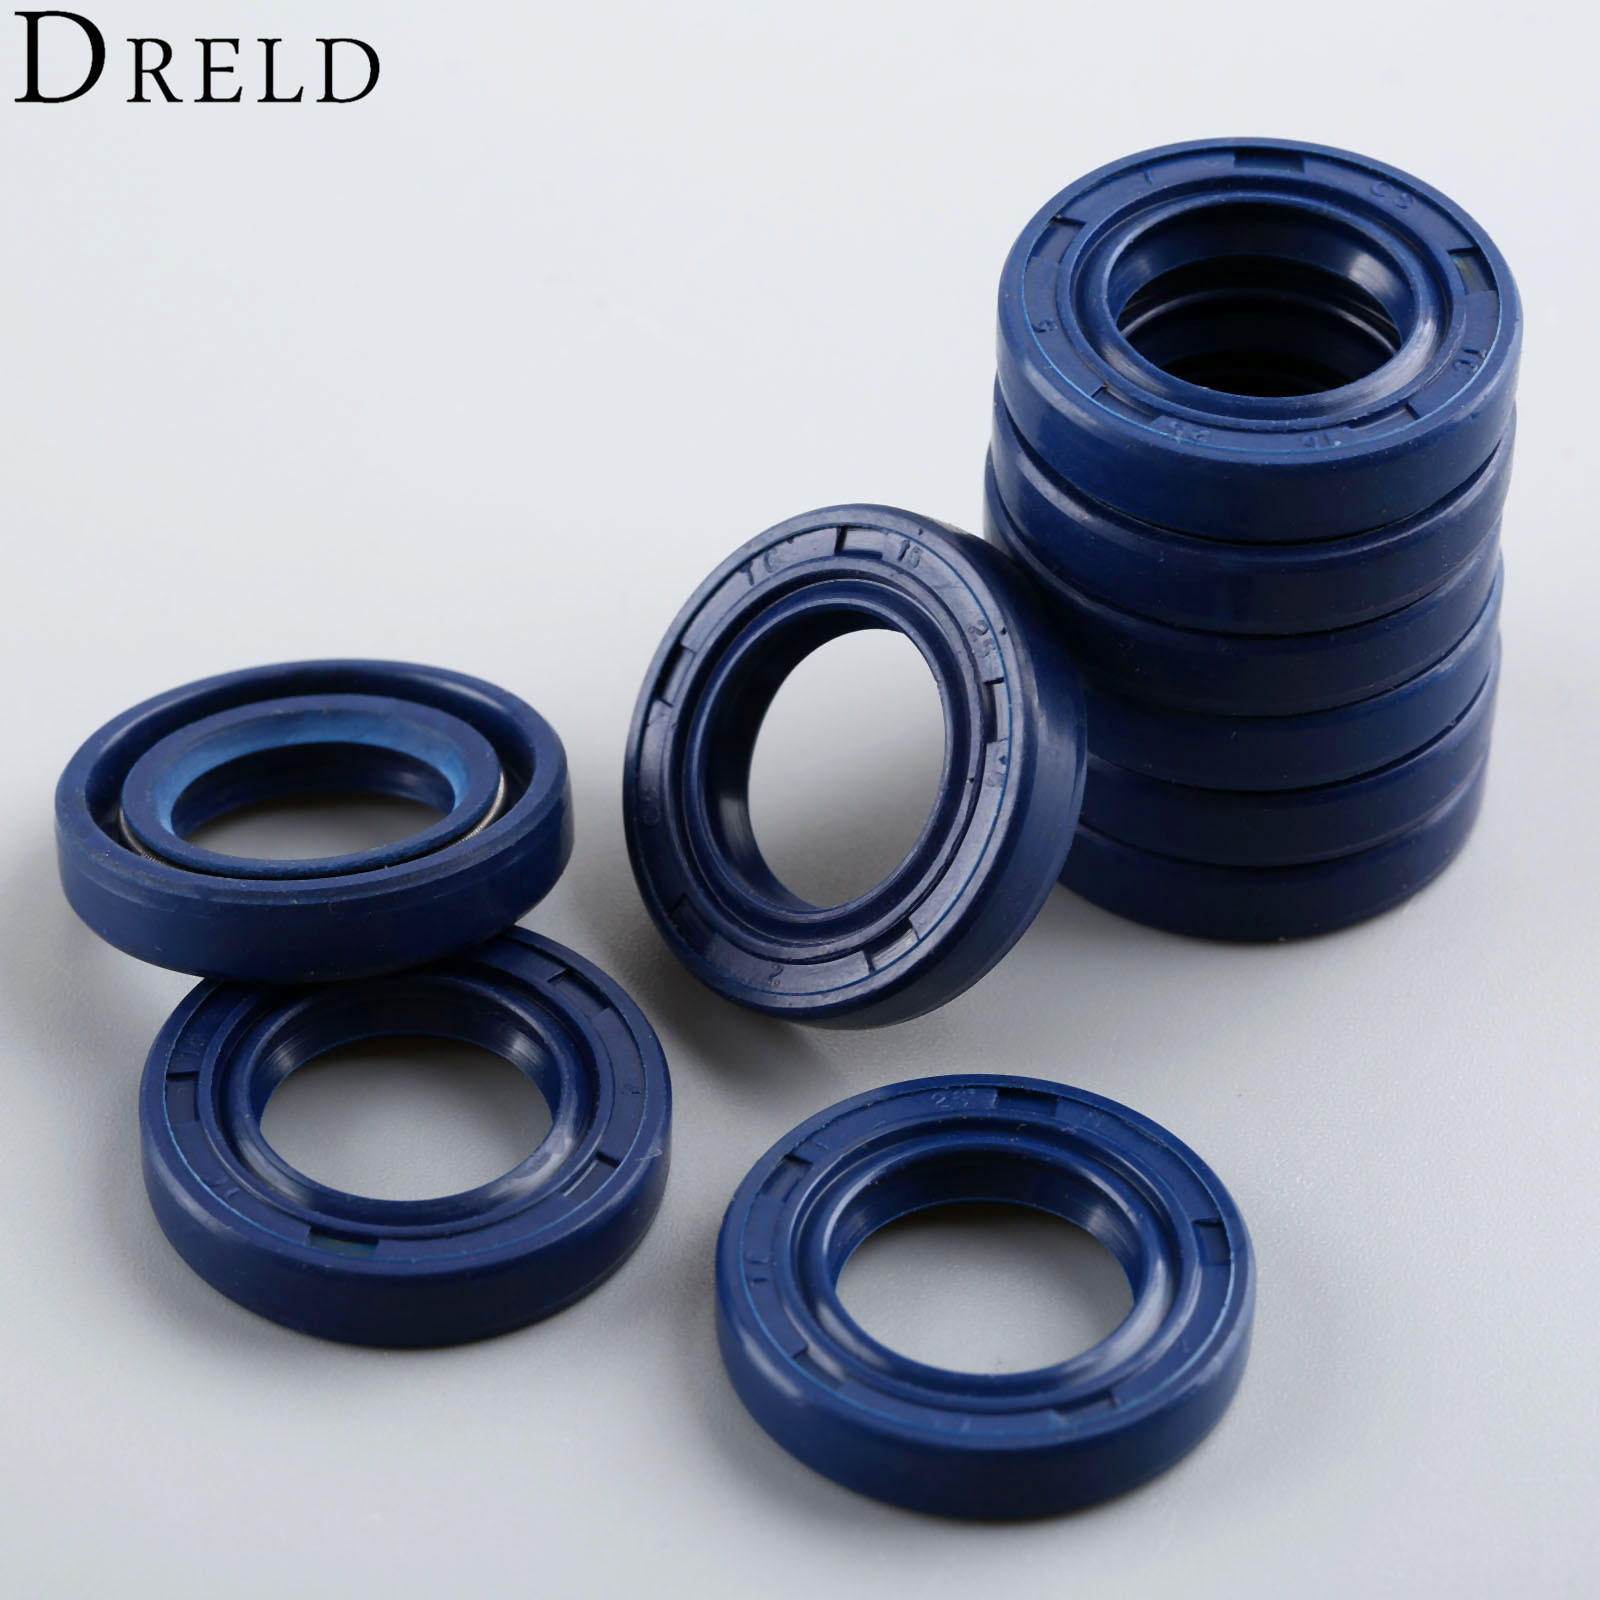 DRELD 10Pcs/lot Chainsaw Oil Seal Kit For STIHL MS250 MS230 MS210 MS180 MS170 017 018 021 023 025 Chainsaw Parts # 9638 003 1581